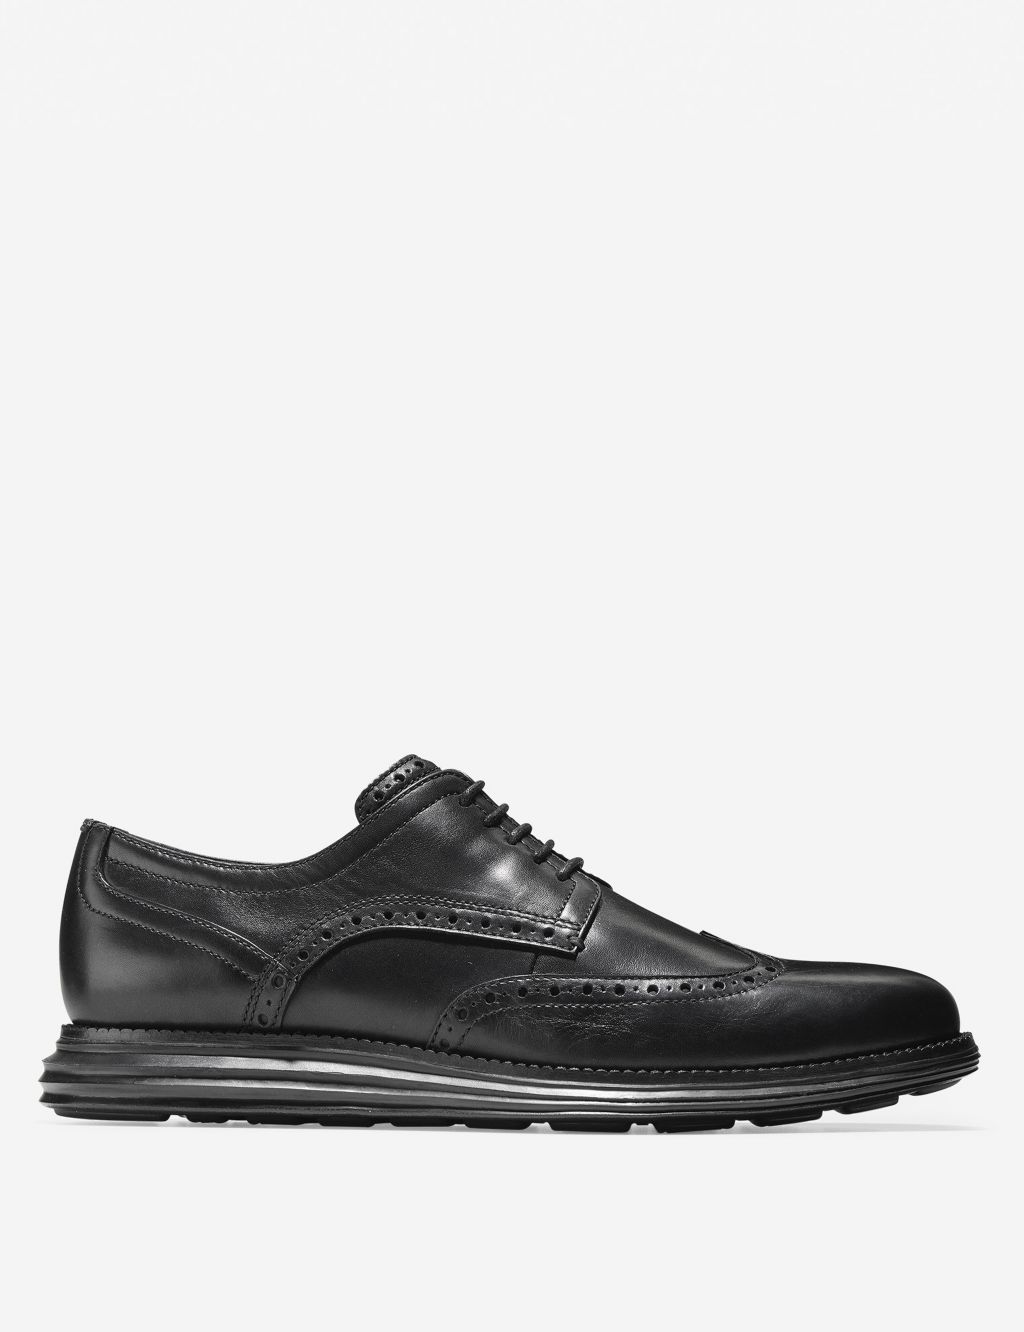 Originalgrand Leather Oxford Shoes 3 of 5